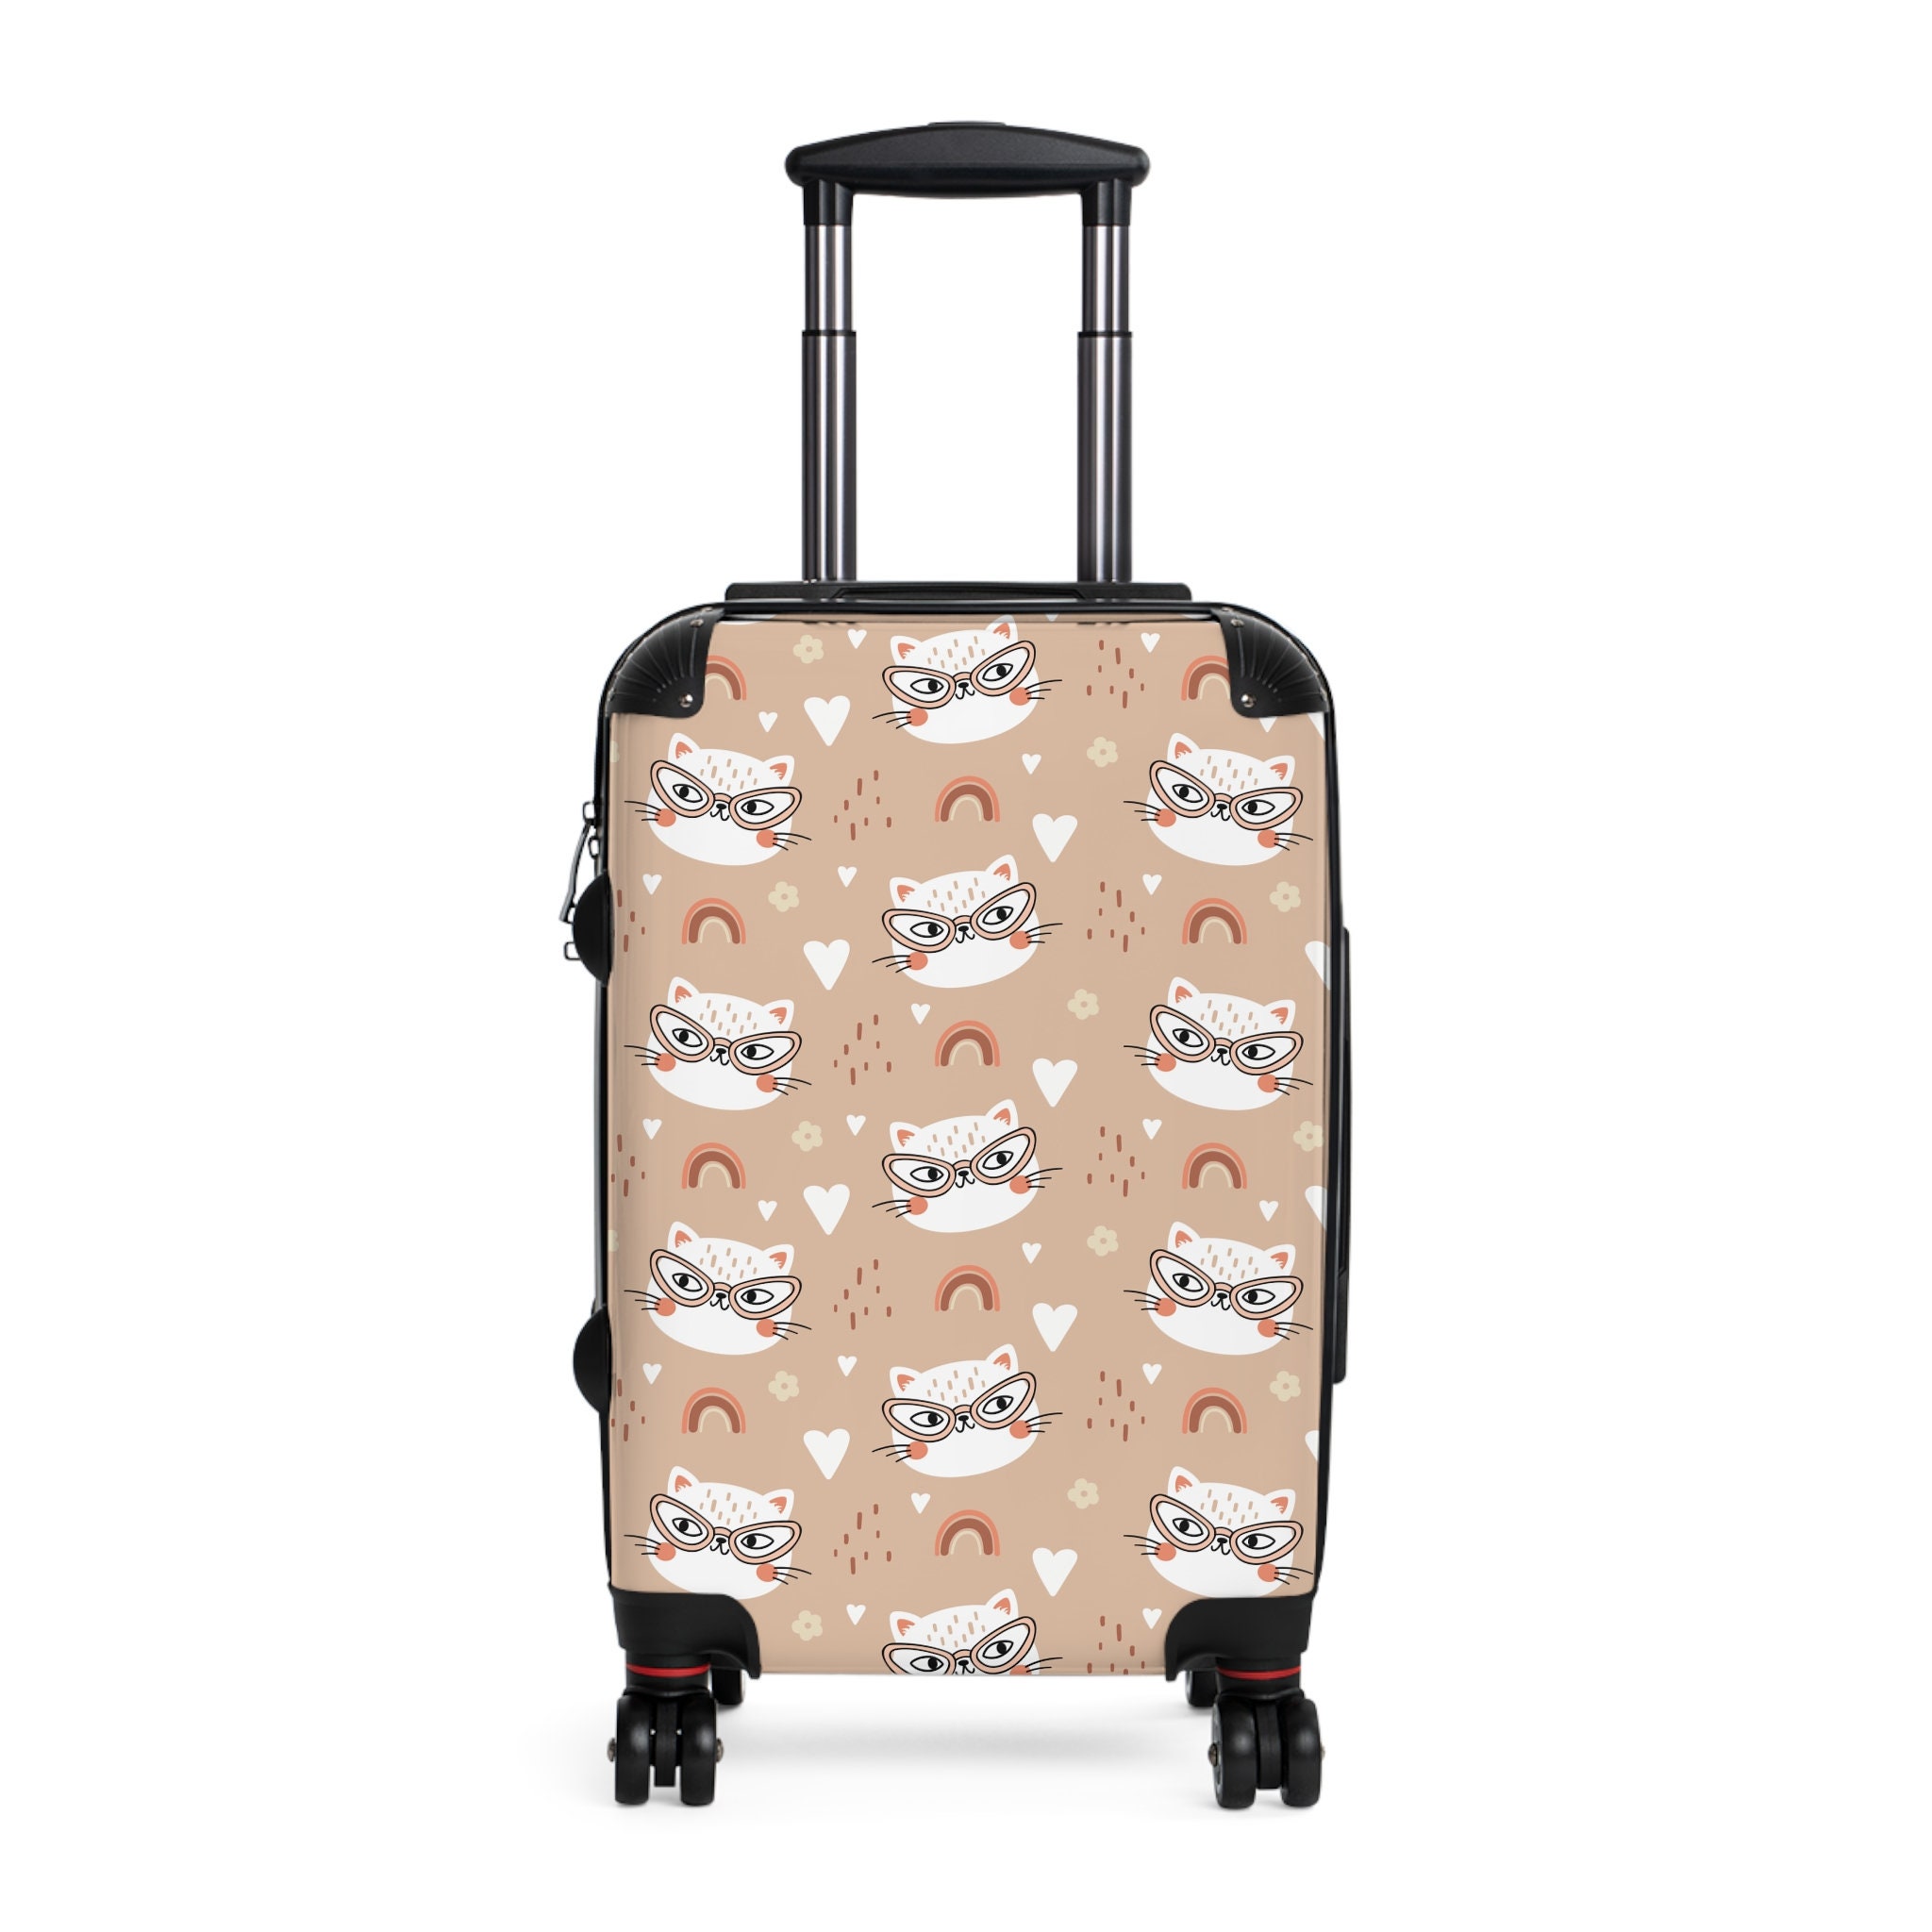 Cute Cat Wearing Glasses Print Matching Family Rolling Luggage Set, Animal Lover Cat Reading Print Suitcase Set